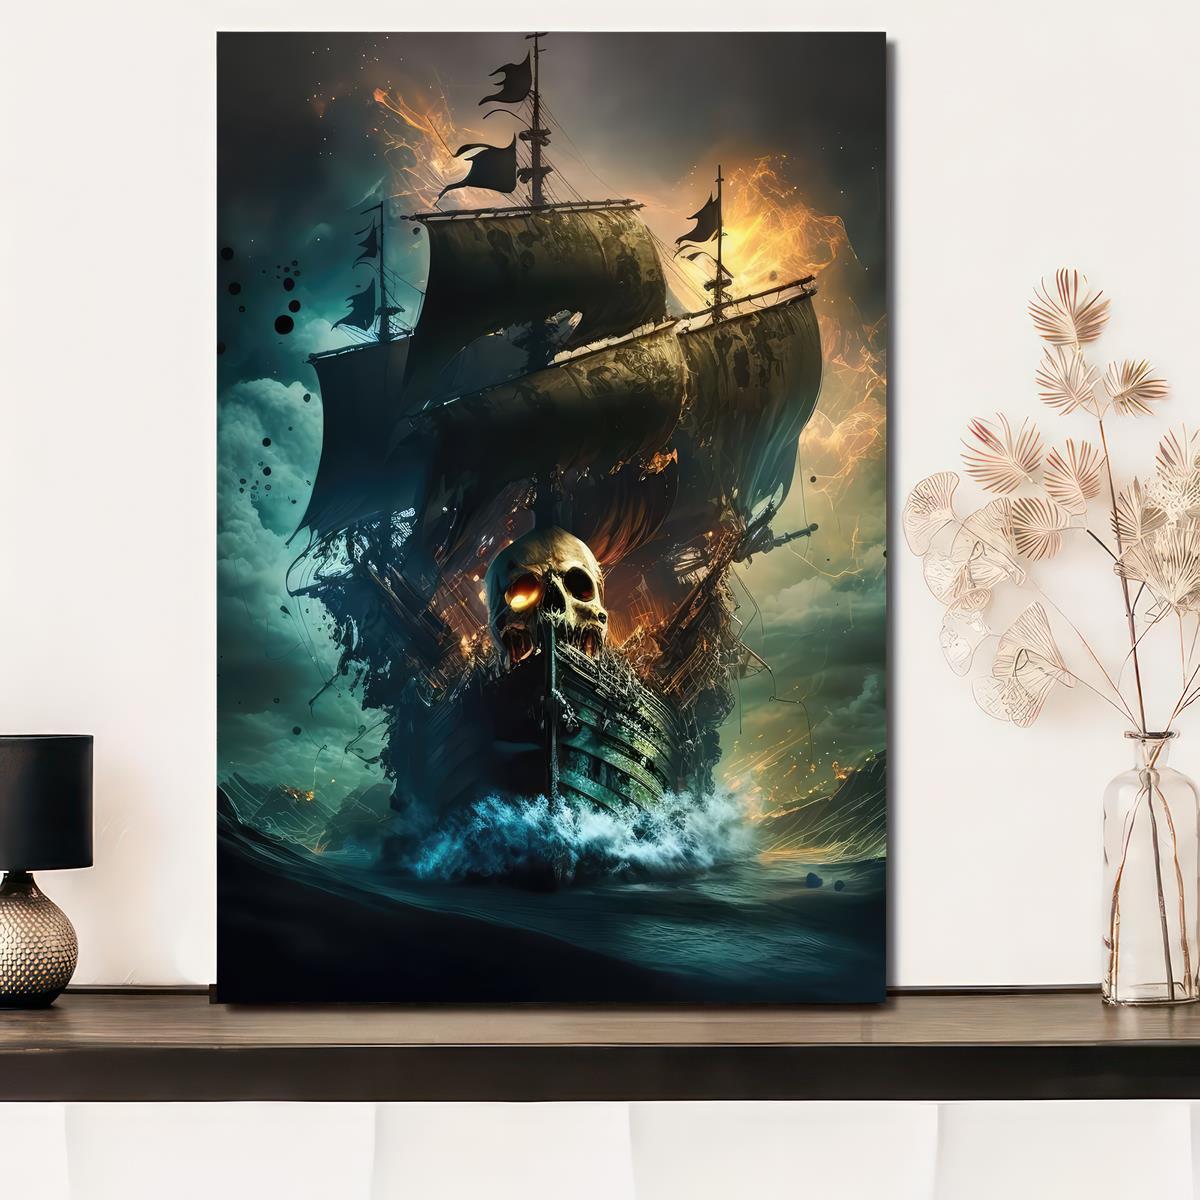 s For Him Artwork Wall Decor Pirate ship Painting Printed canvas